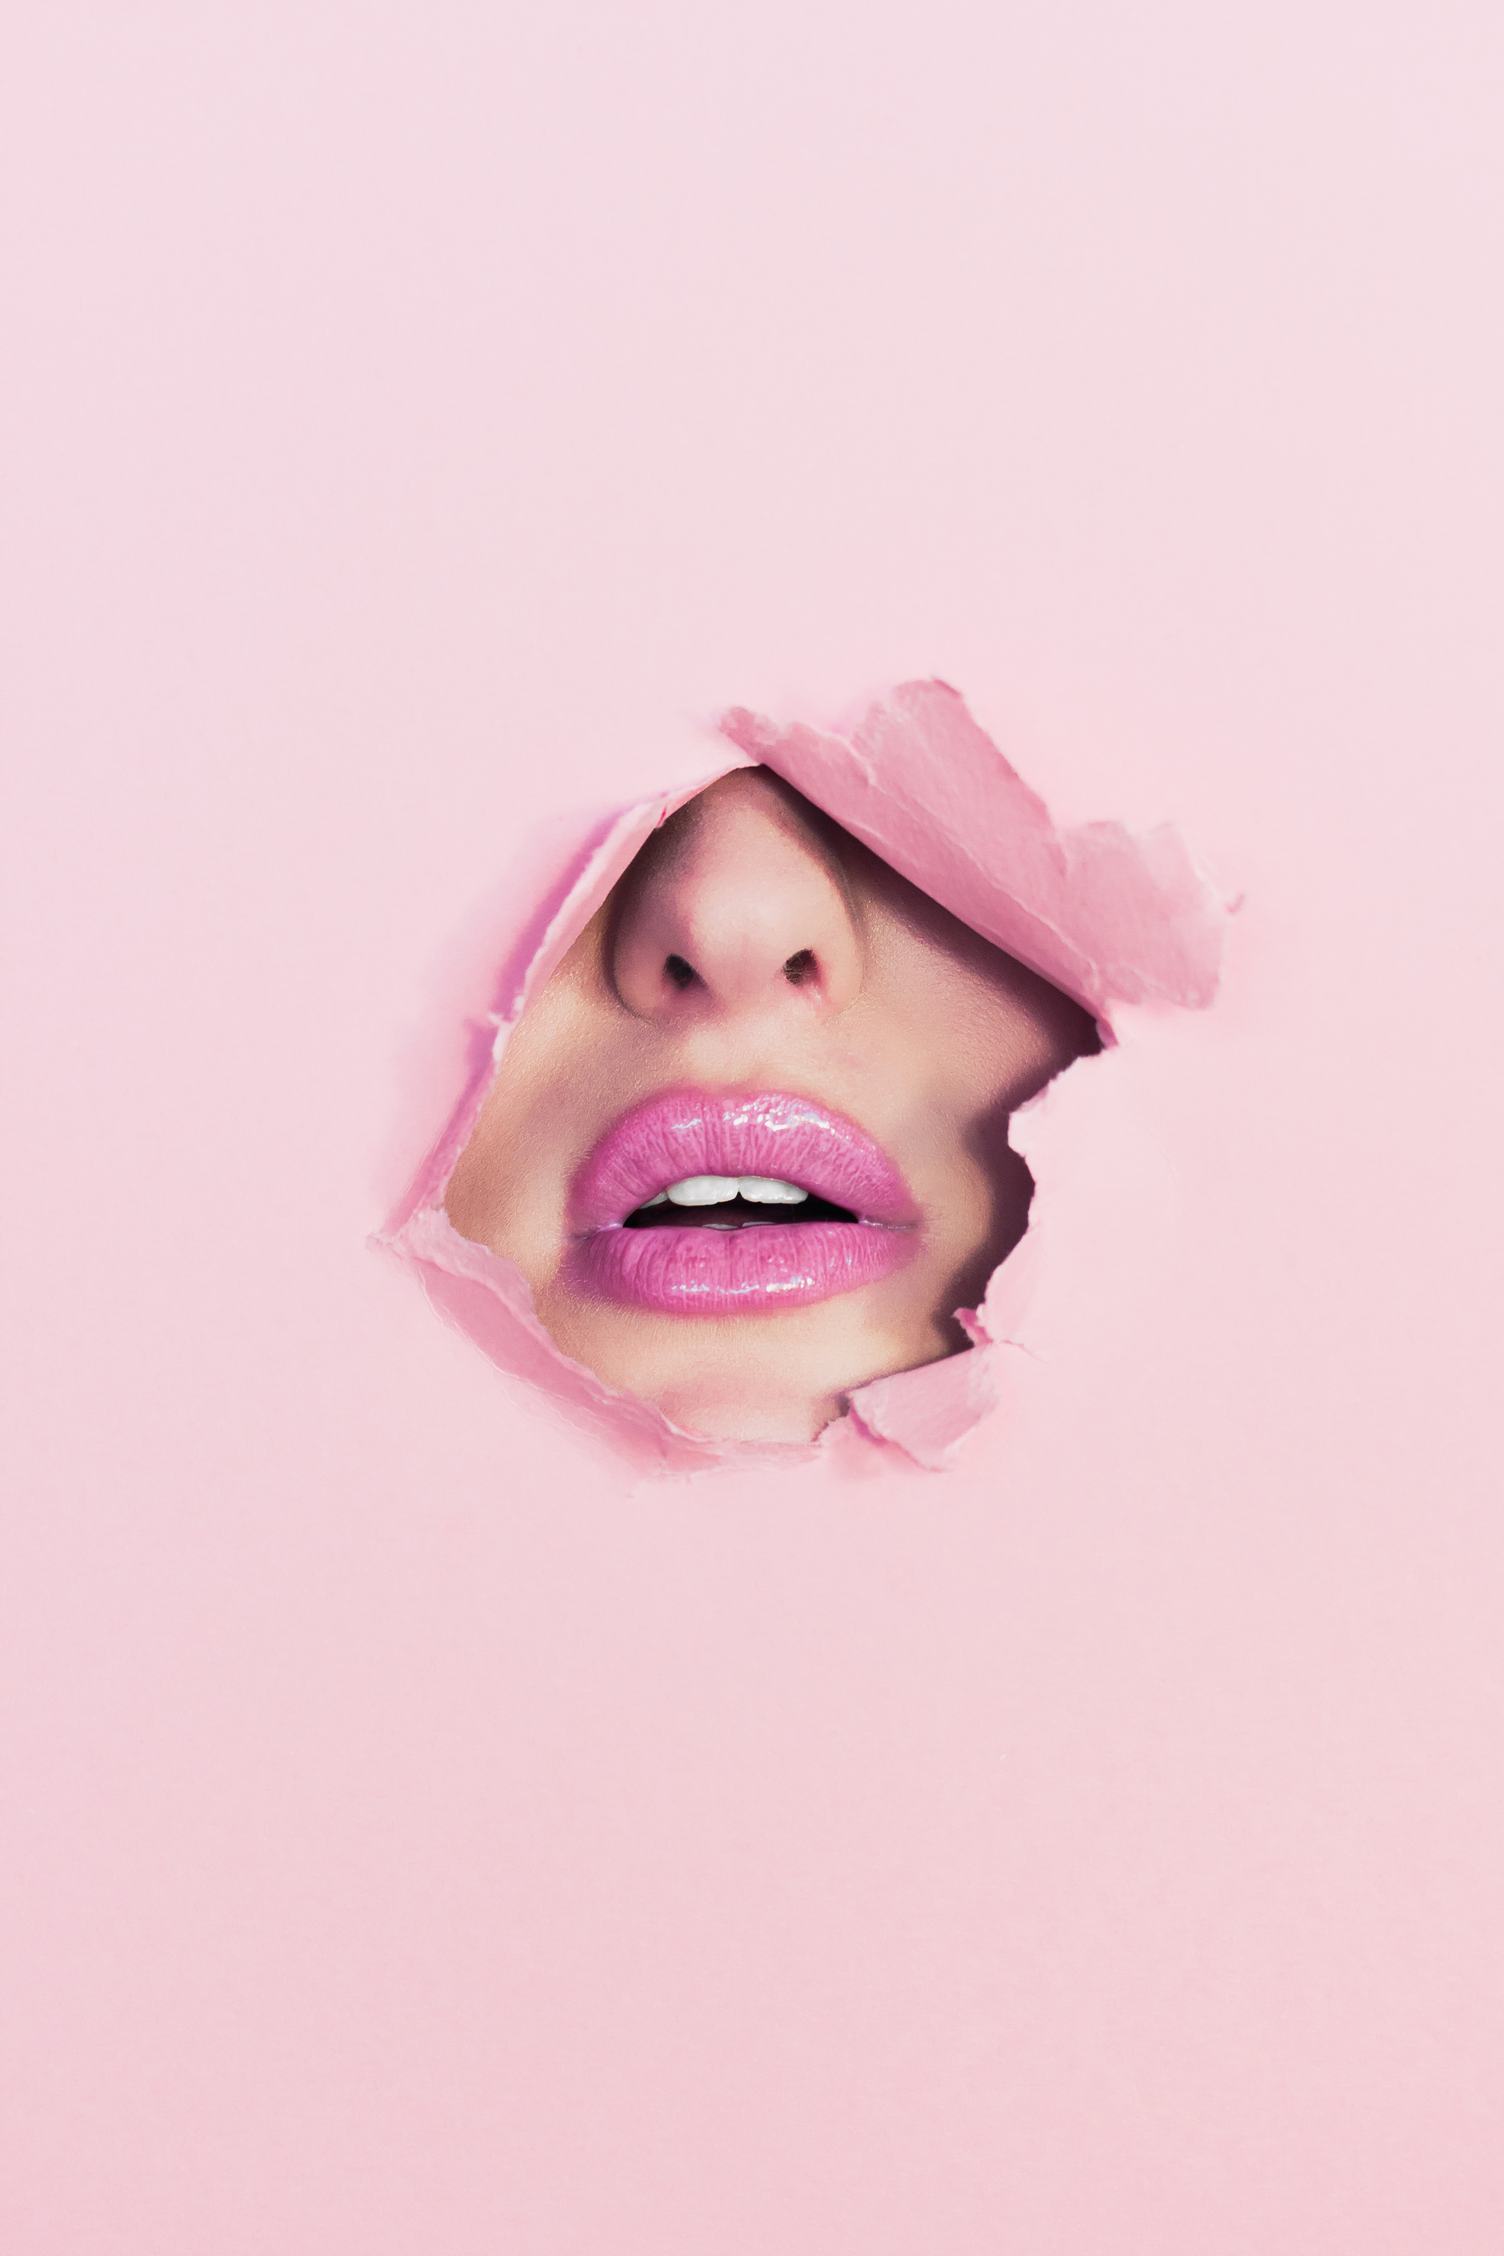 Pink Portrait Woman with Open Mouth